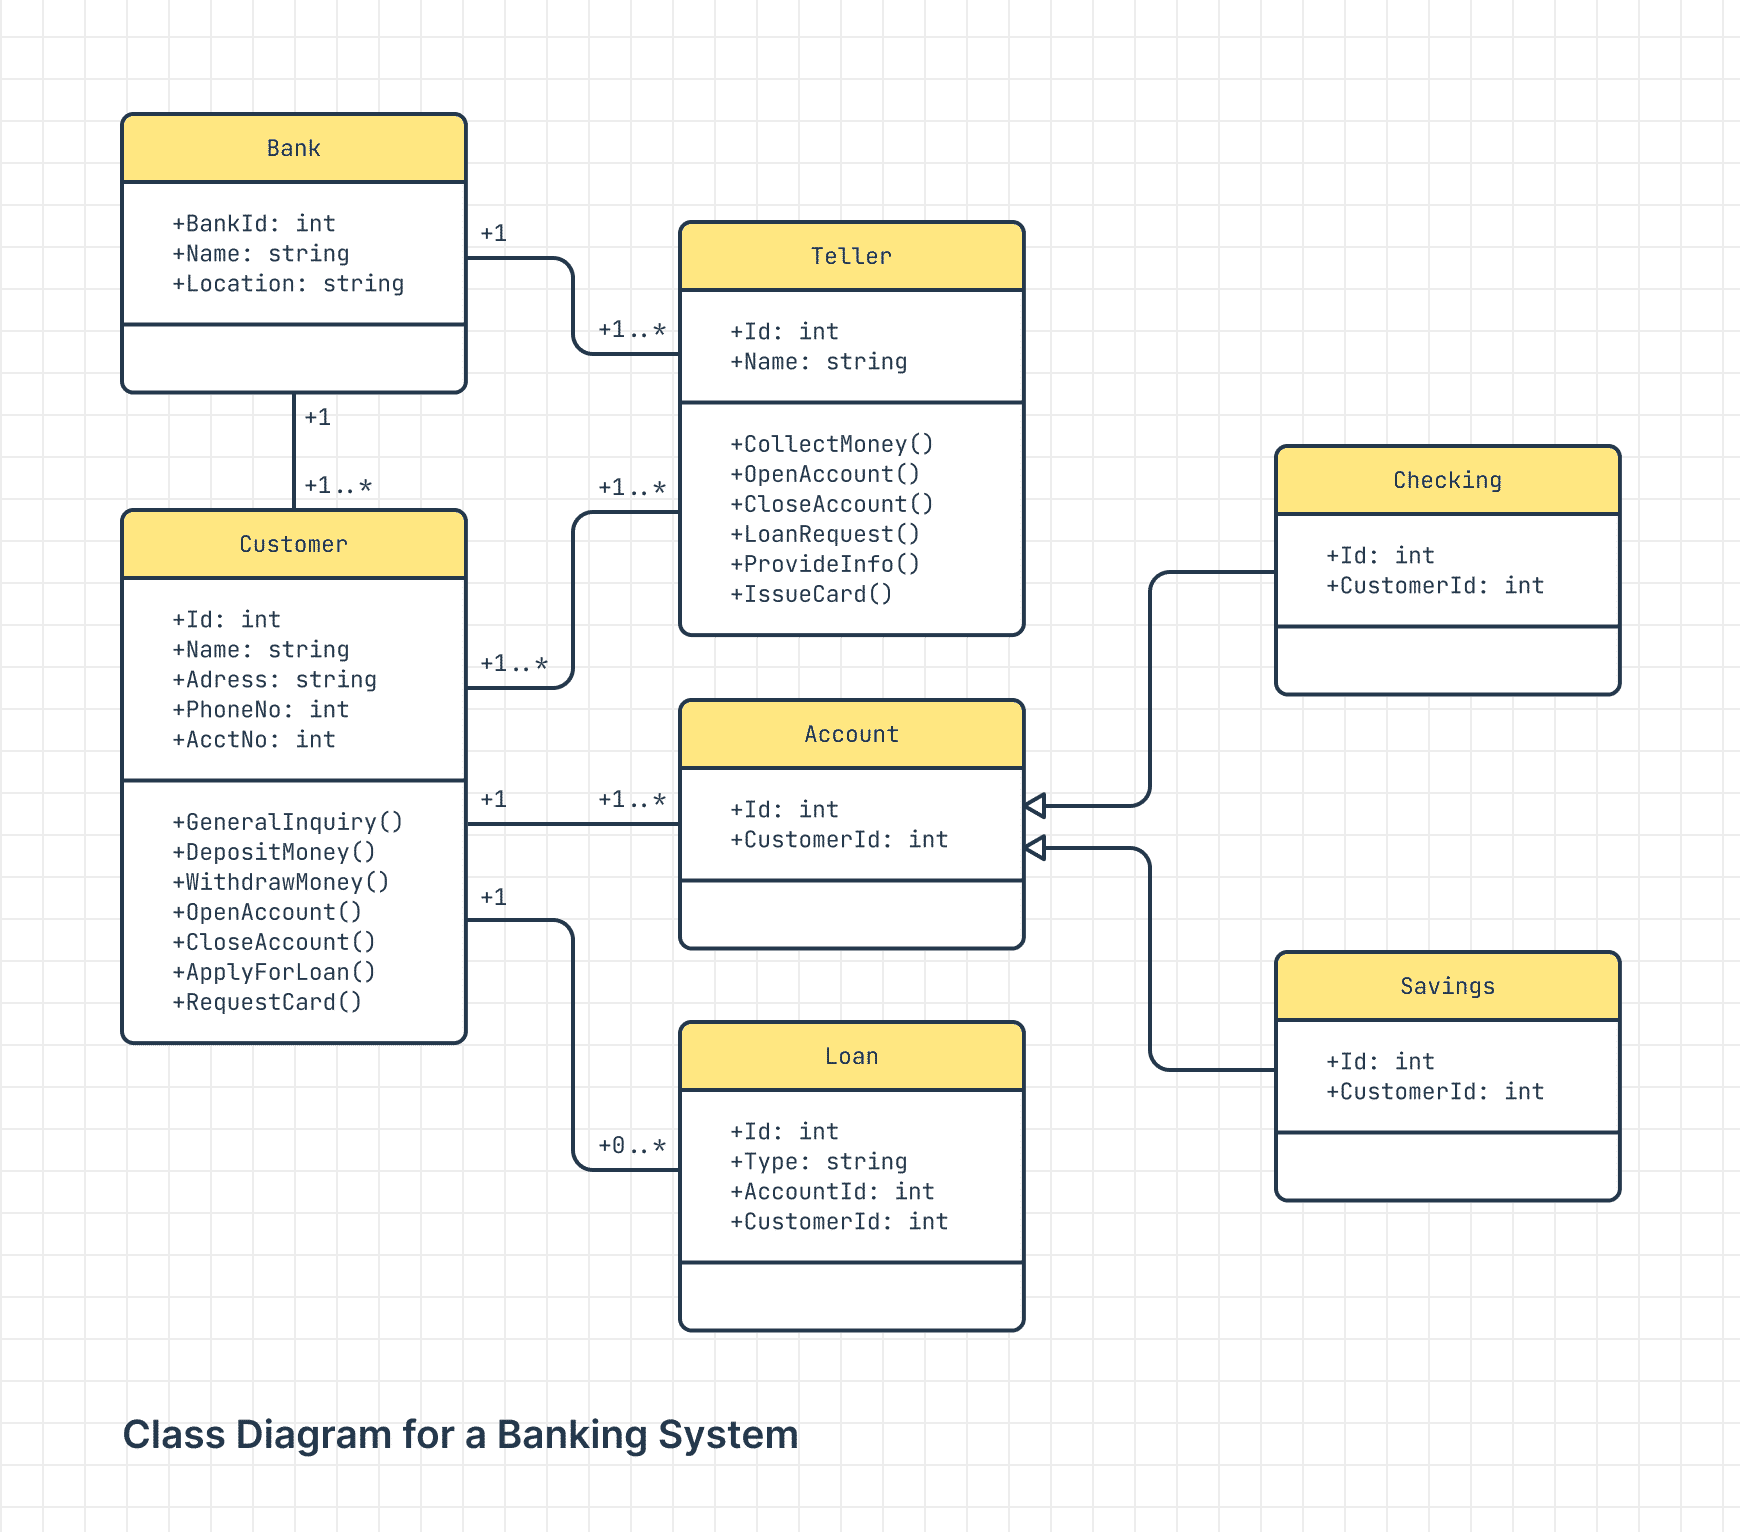 UML class diagram for a banking system